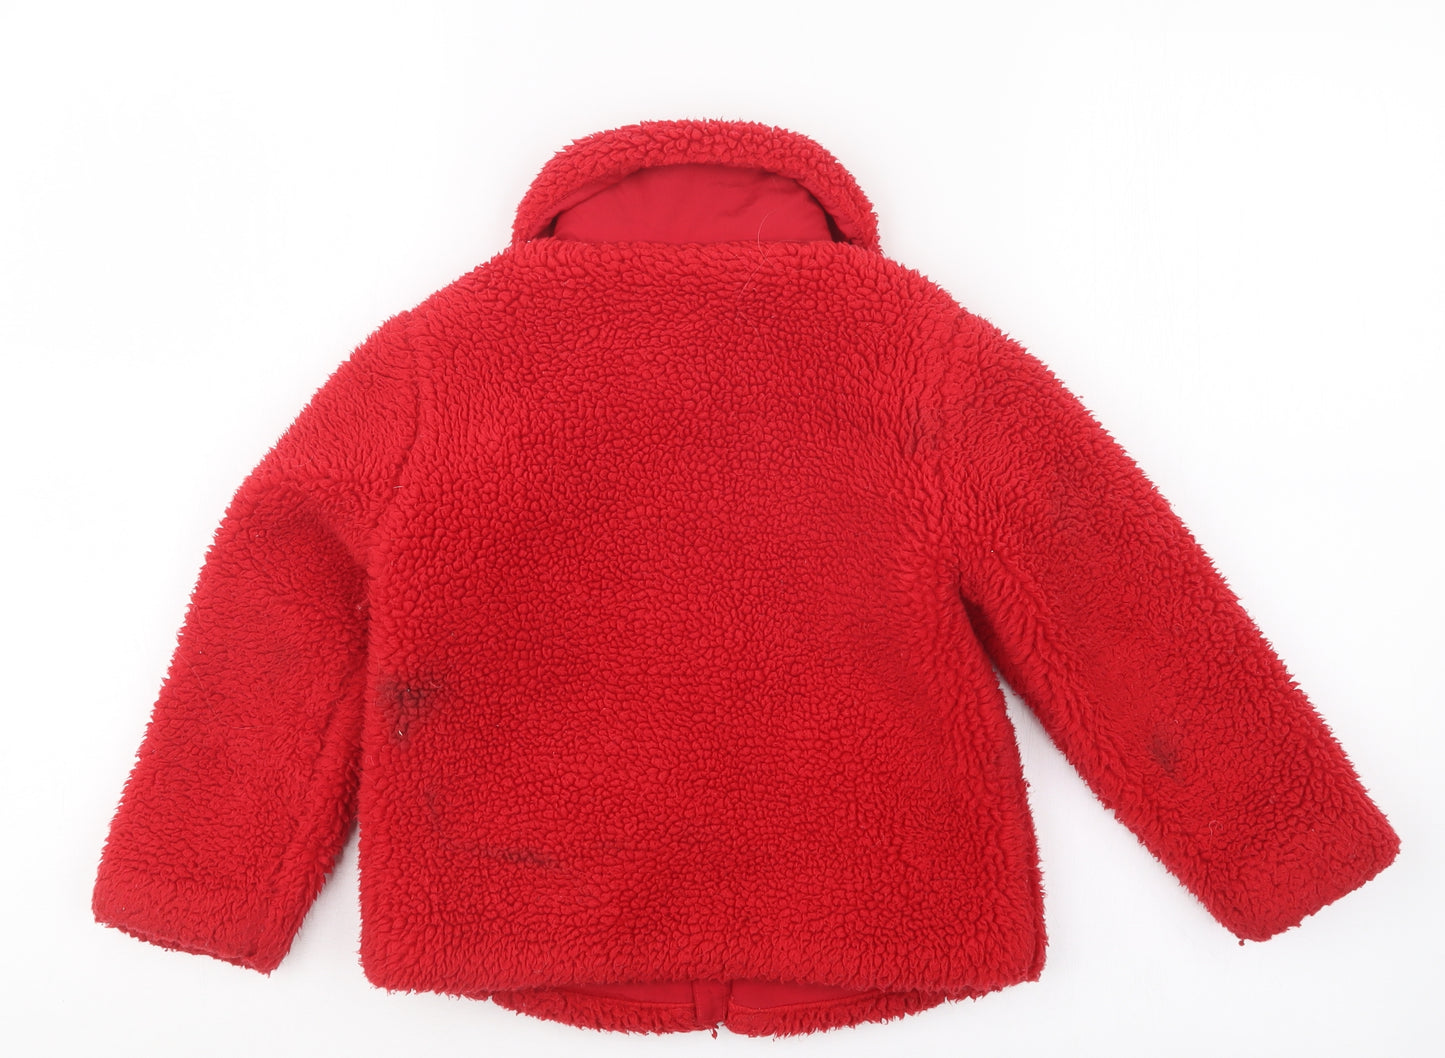 George Girls Red   Jacket  Size 4-5 Years